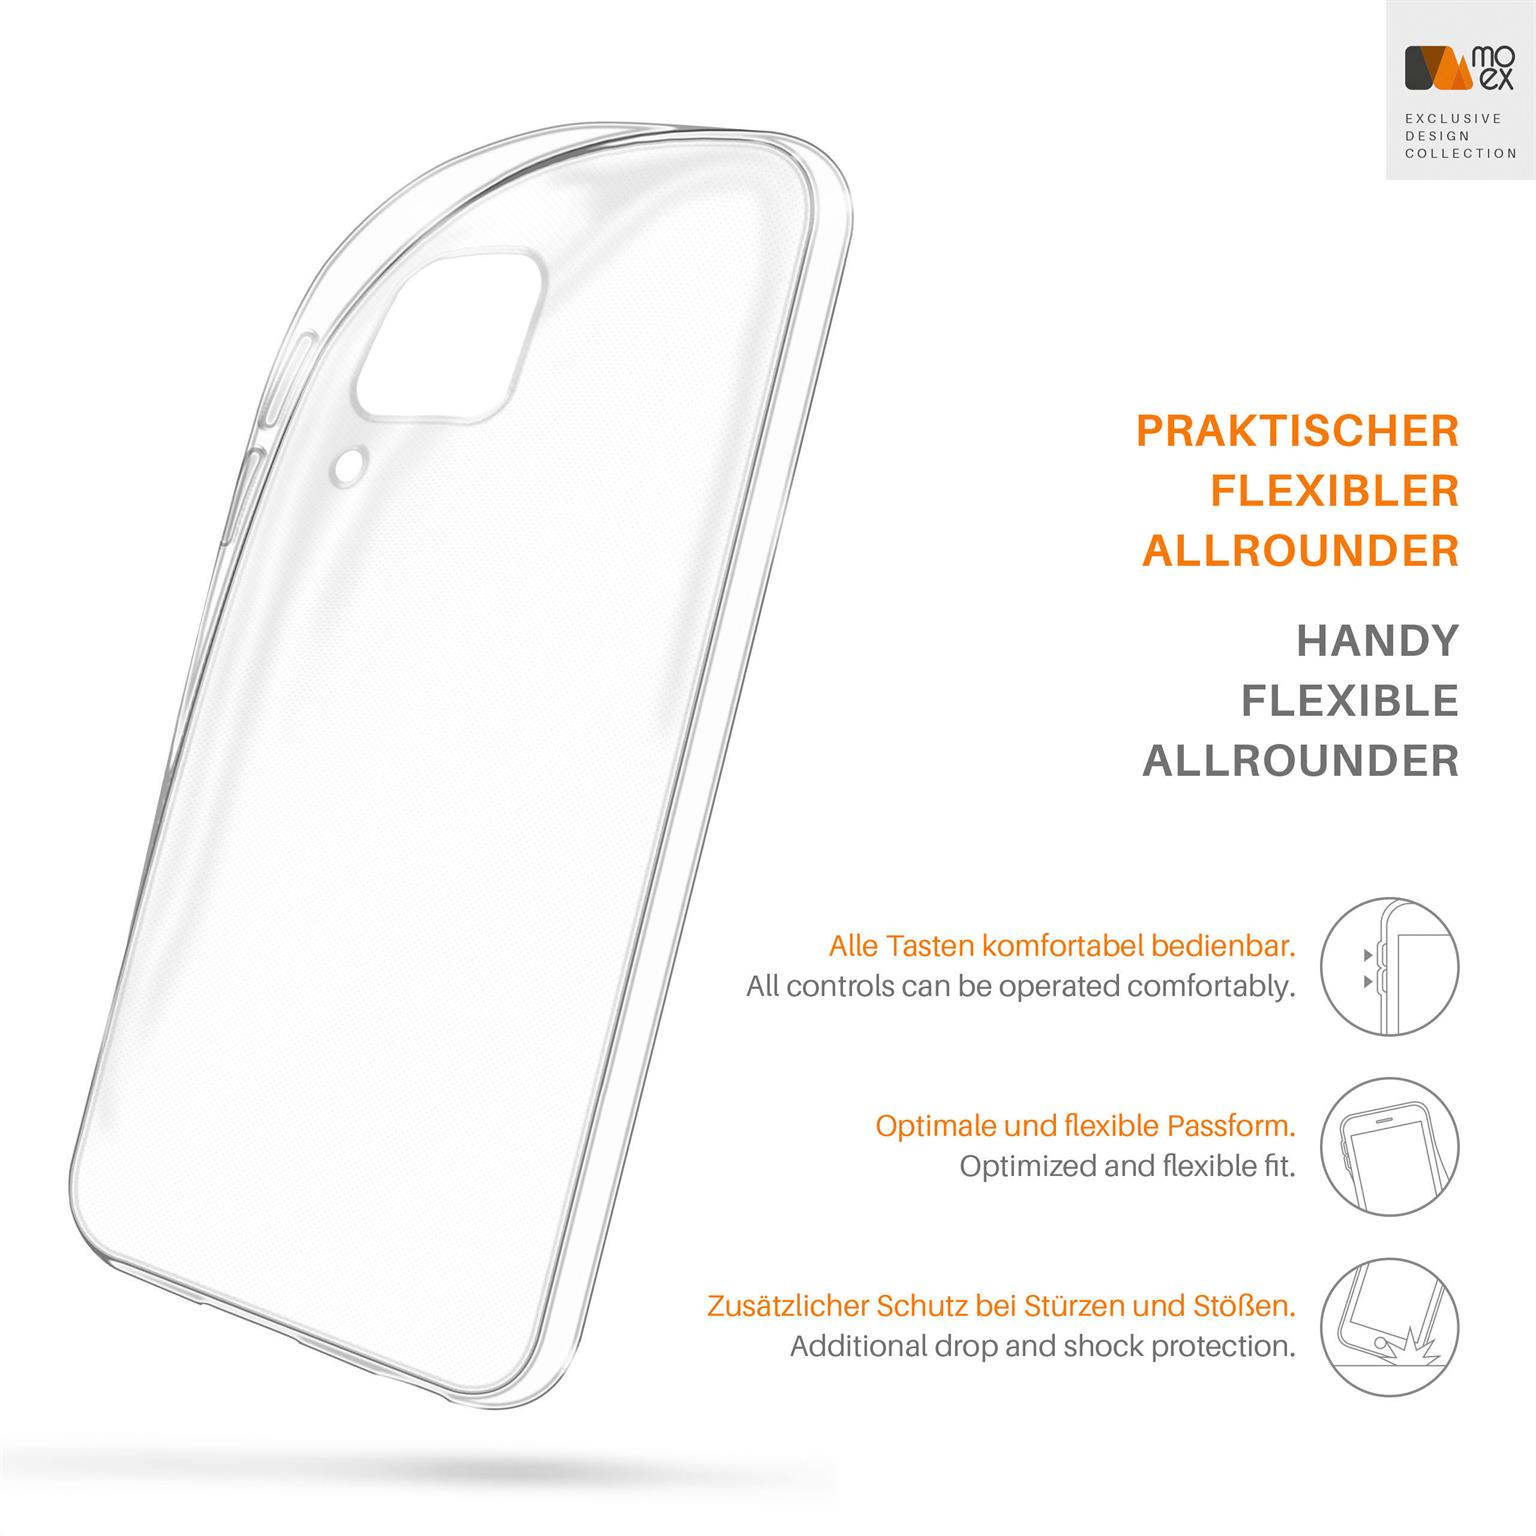 Backcover, Lite, P40 Huawei, MOEX Crystal-Clear Aero Case,